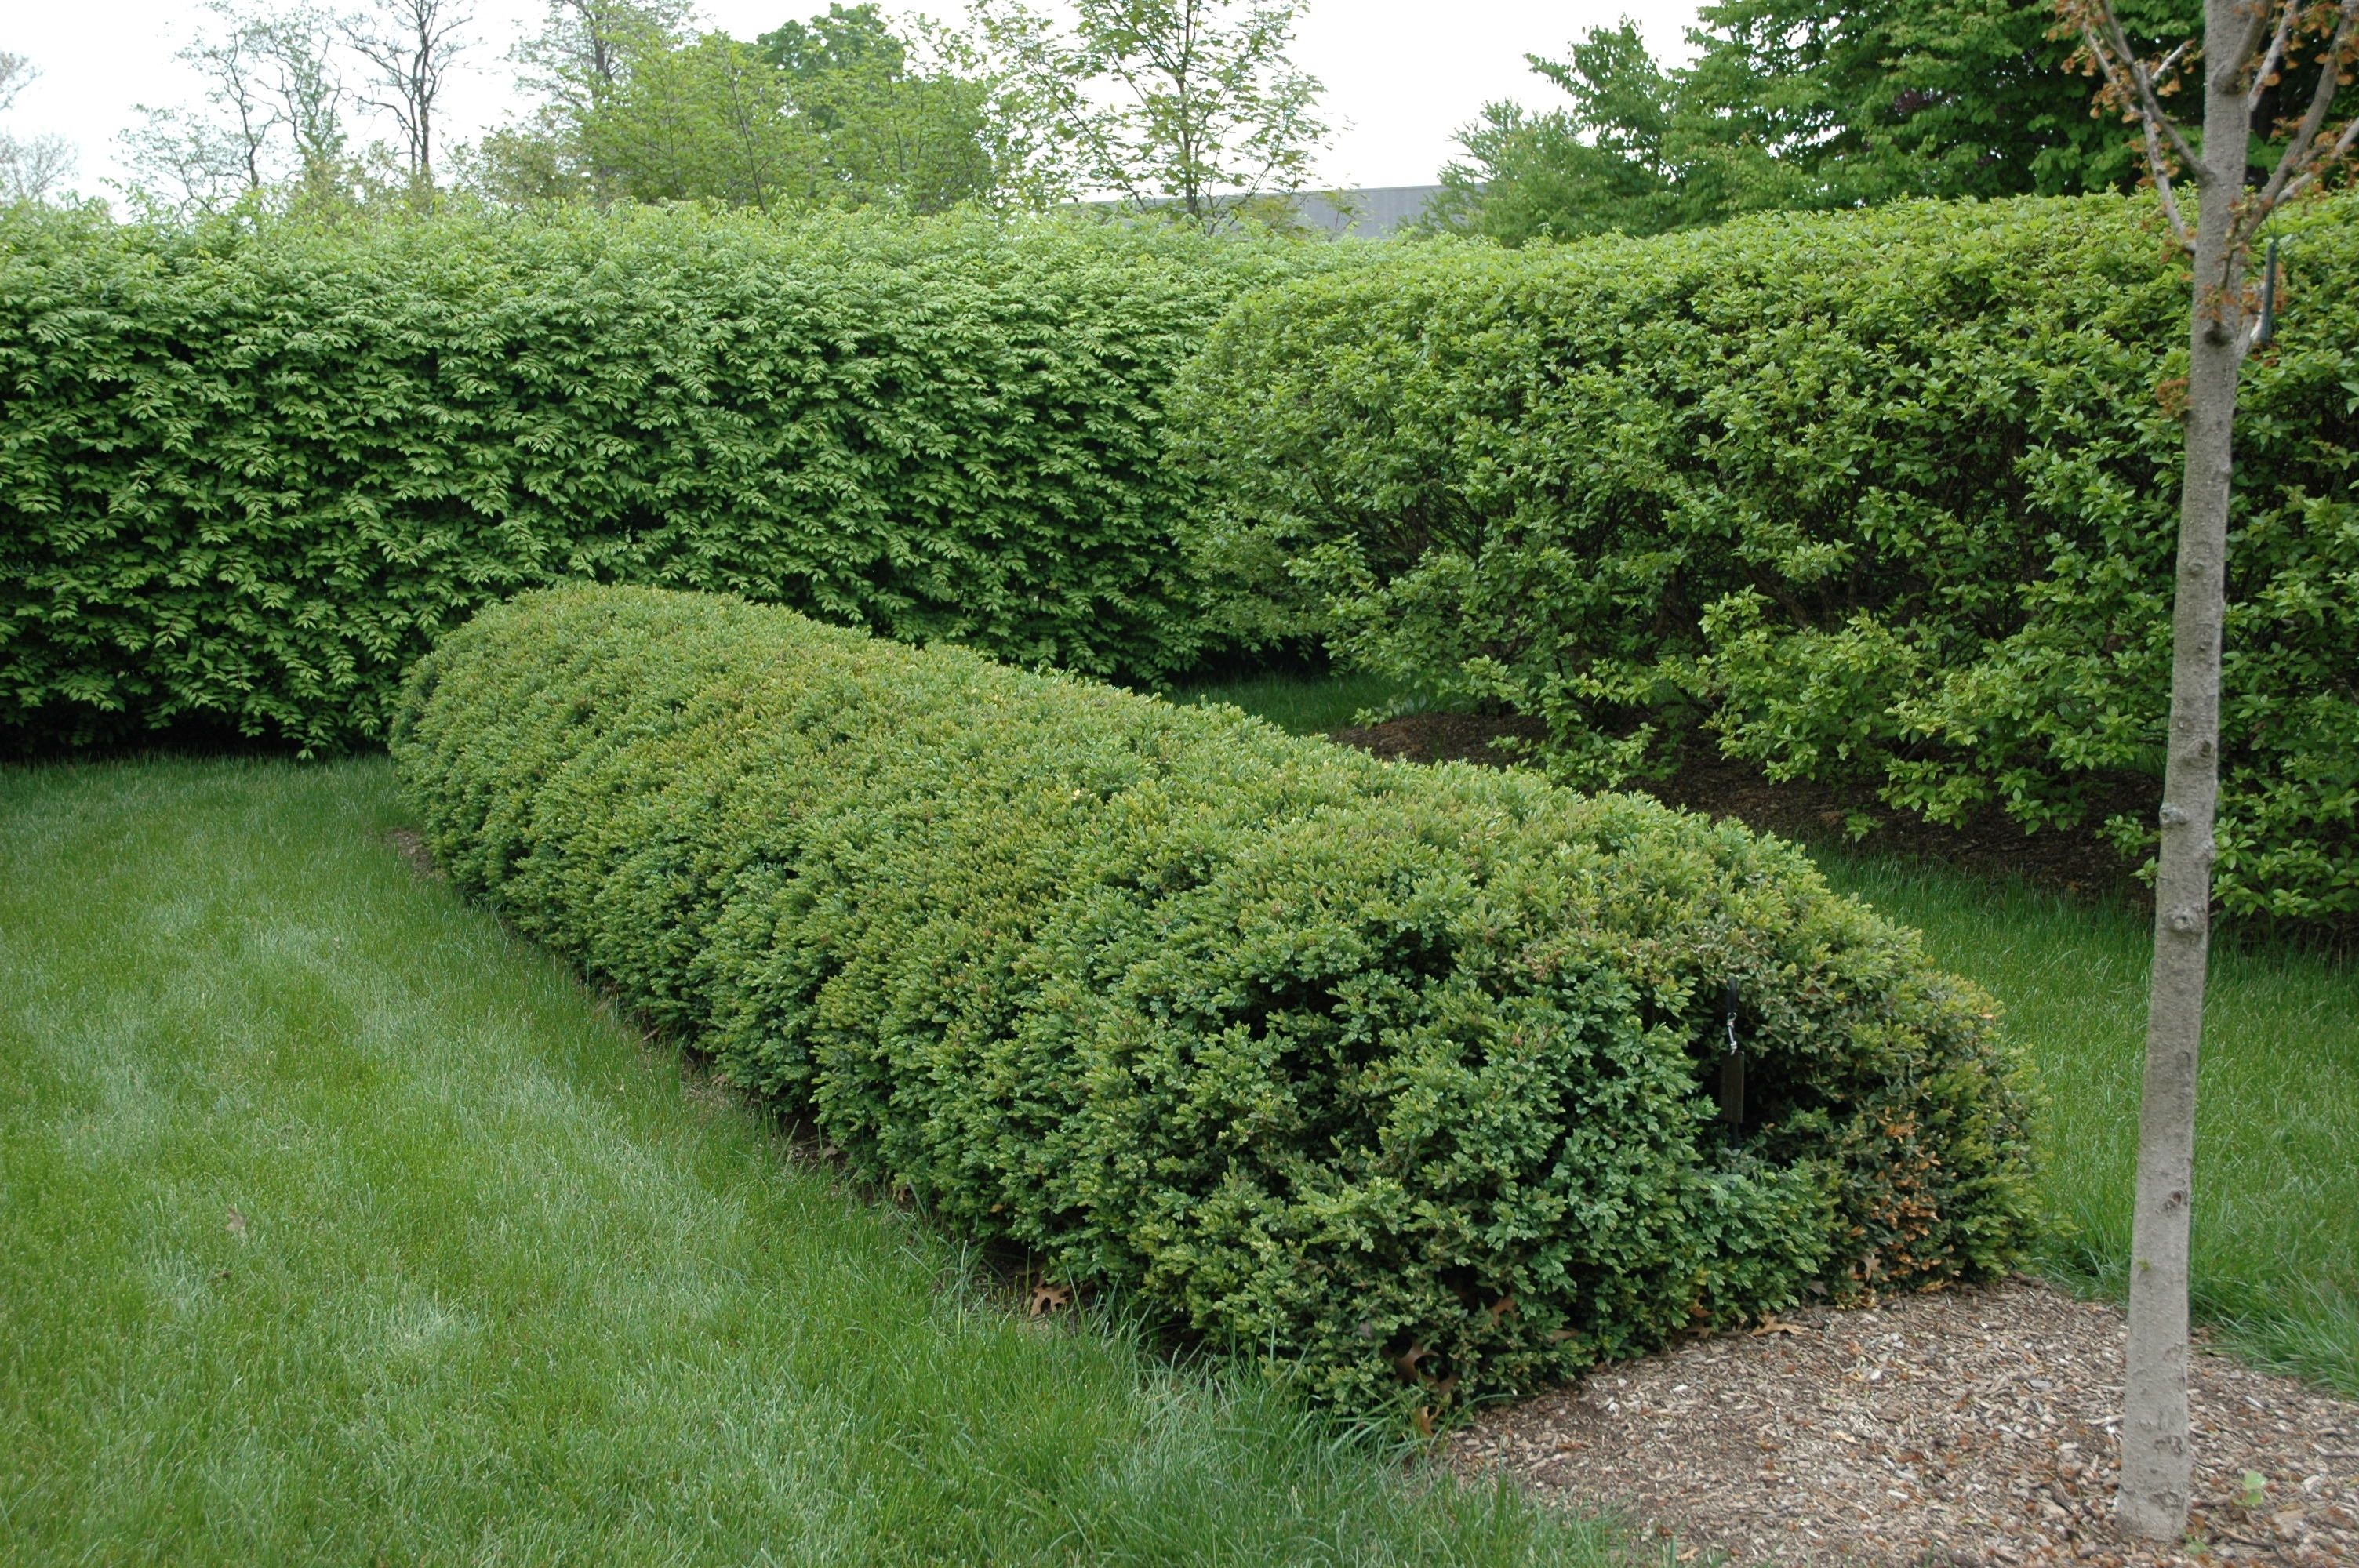 images/plants/buxus/bux-chicagoland-green/bux-chicagoland-green-0010.jpg